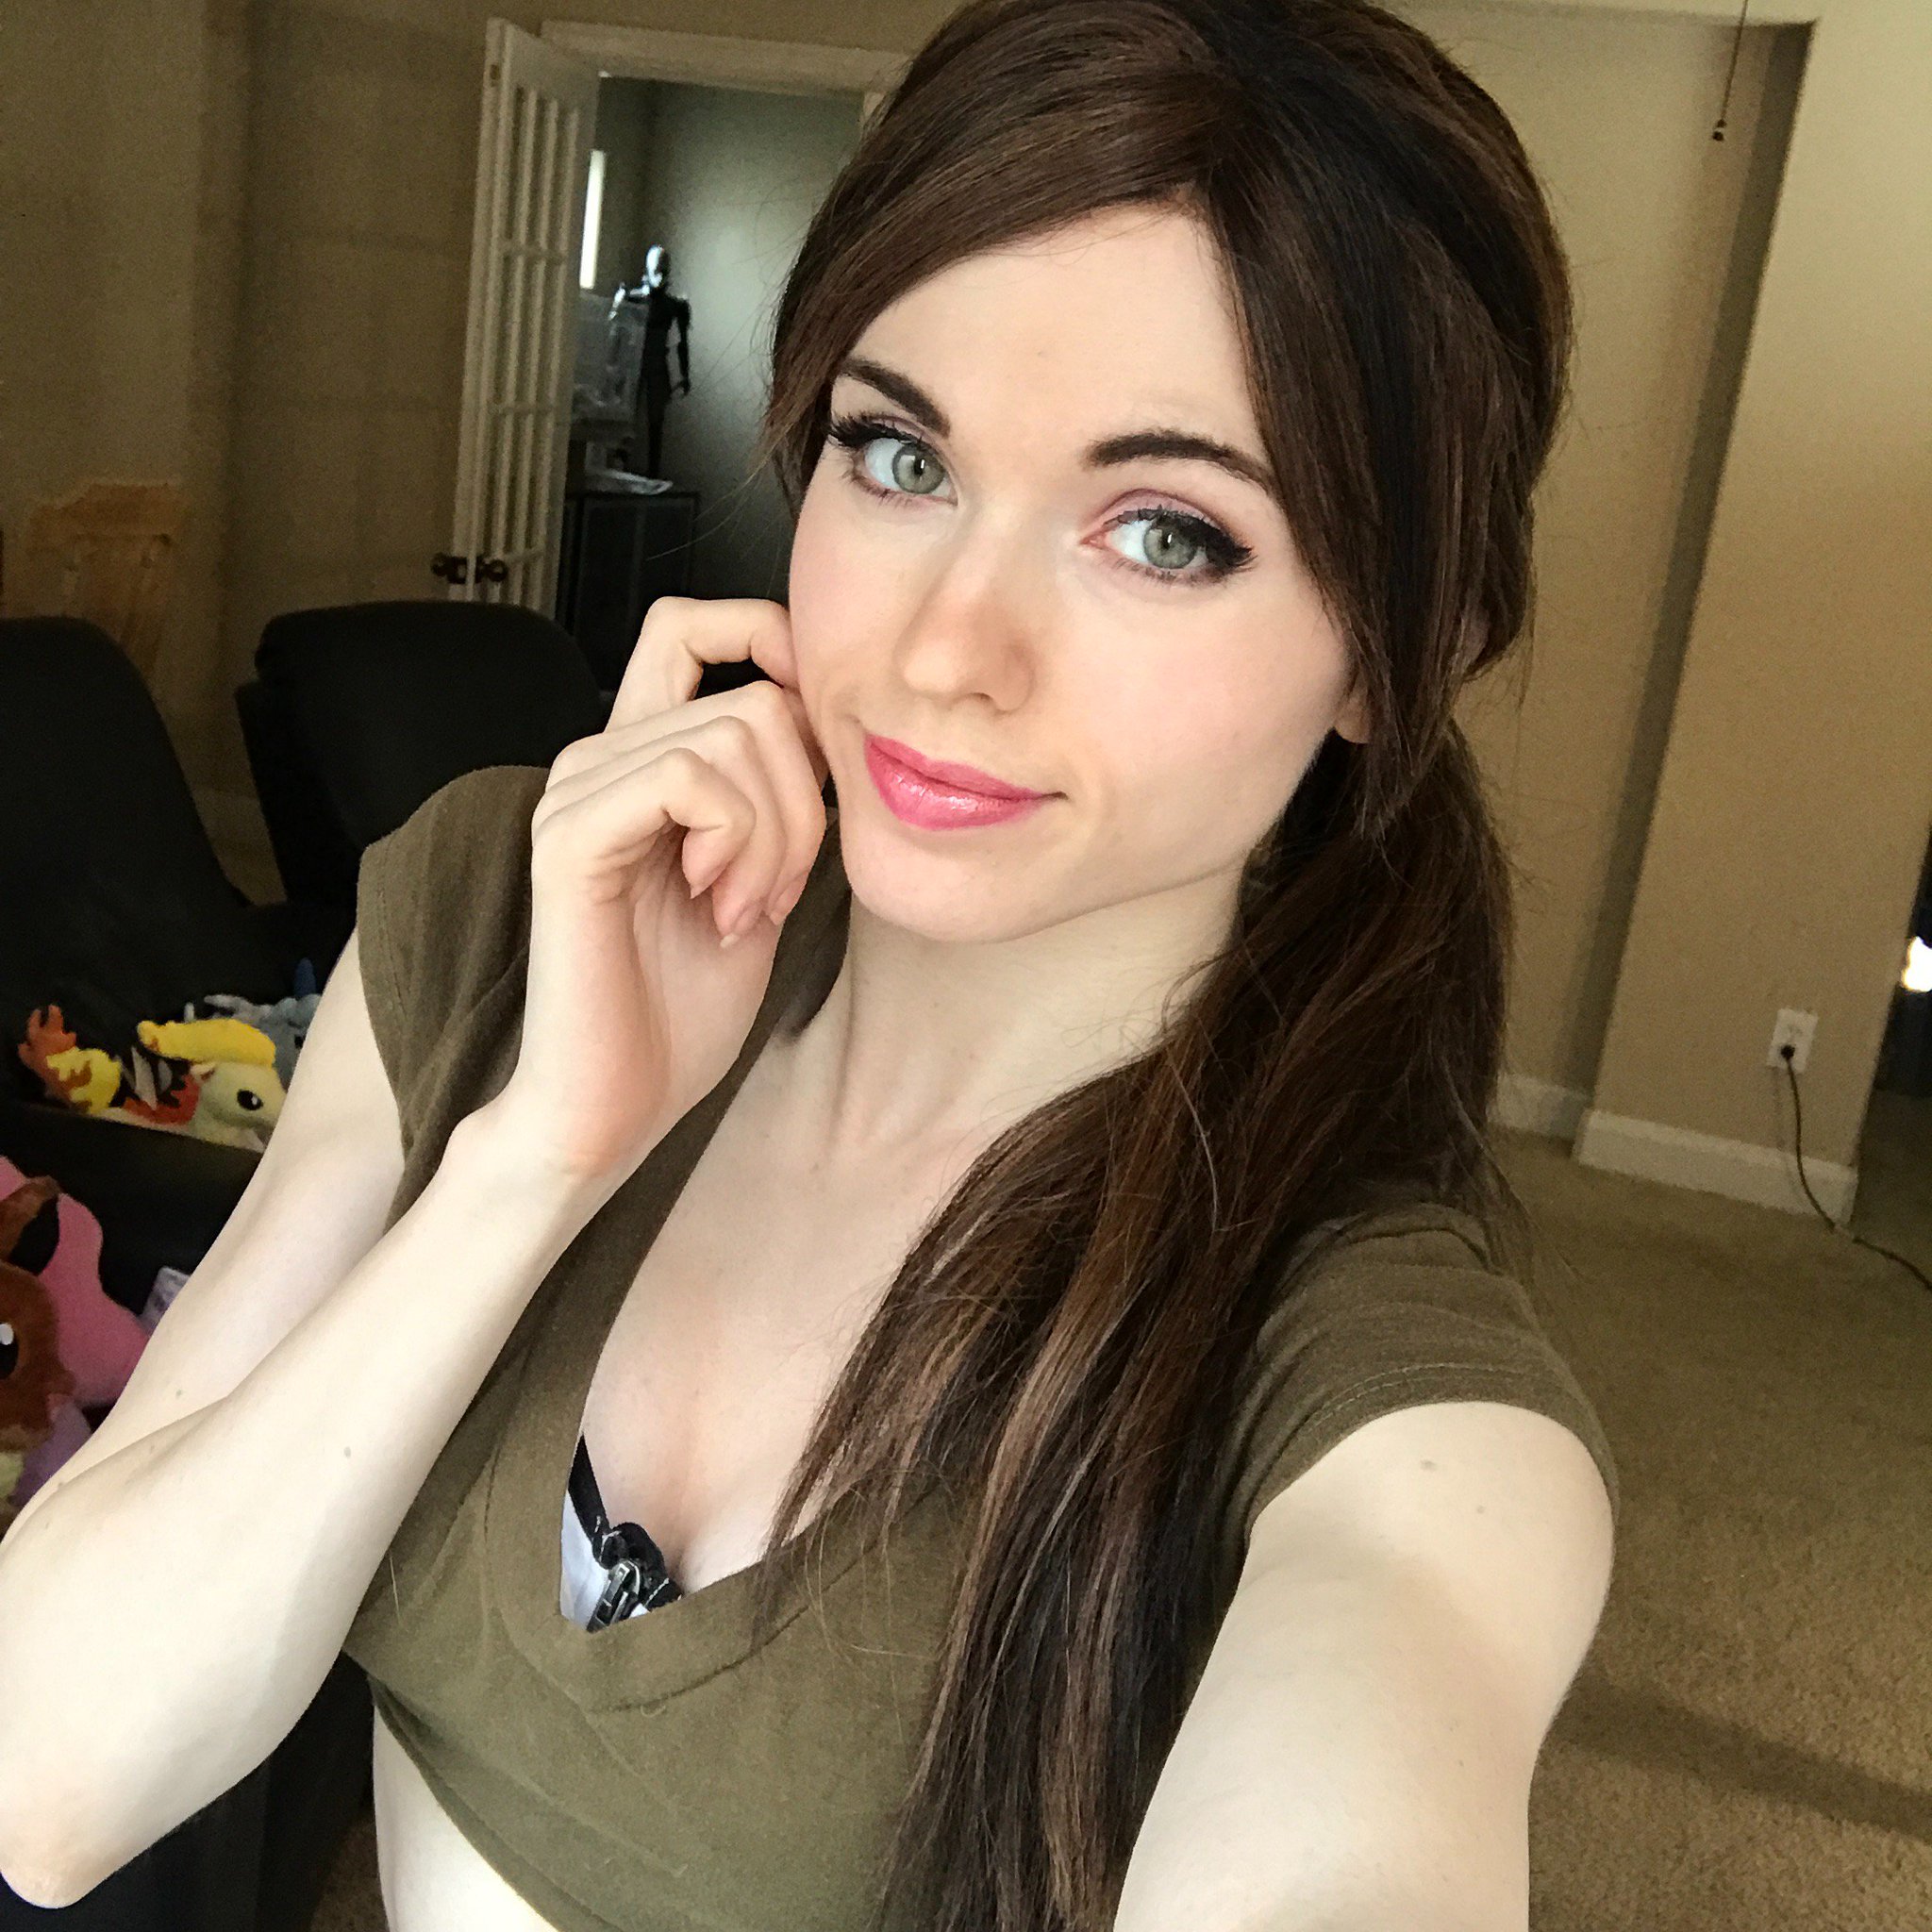 Amouranth on Twitter.